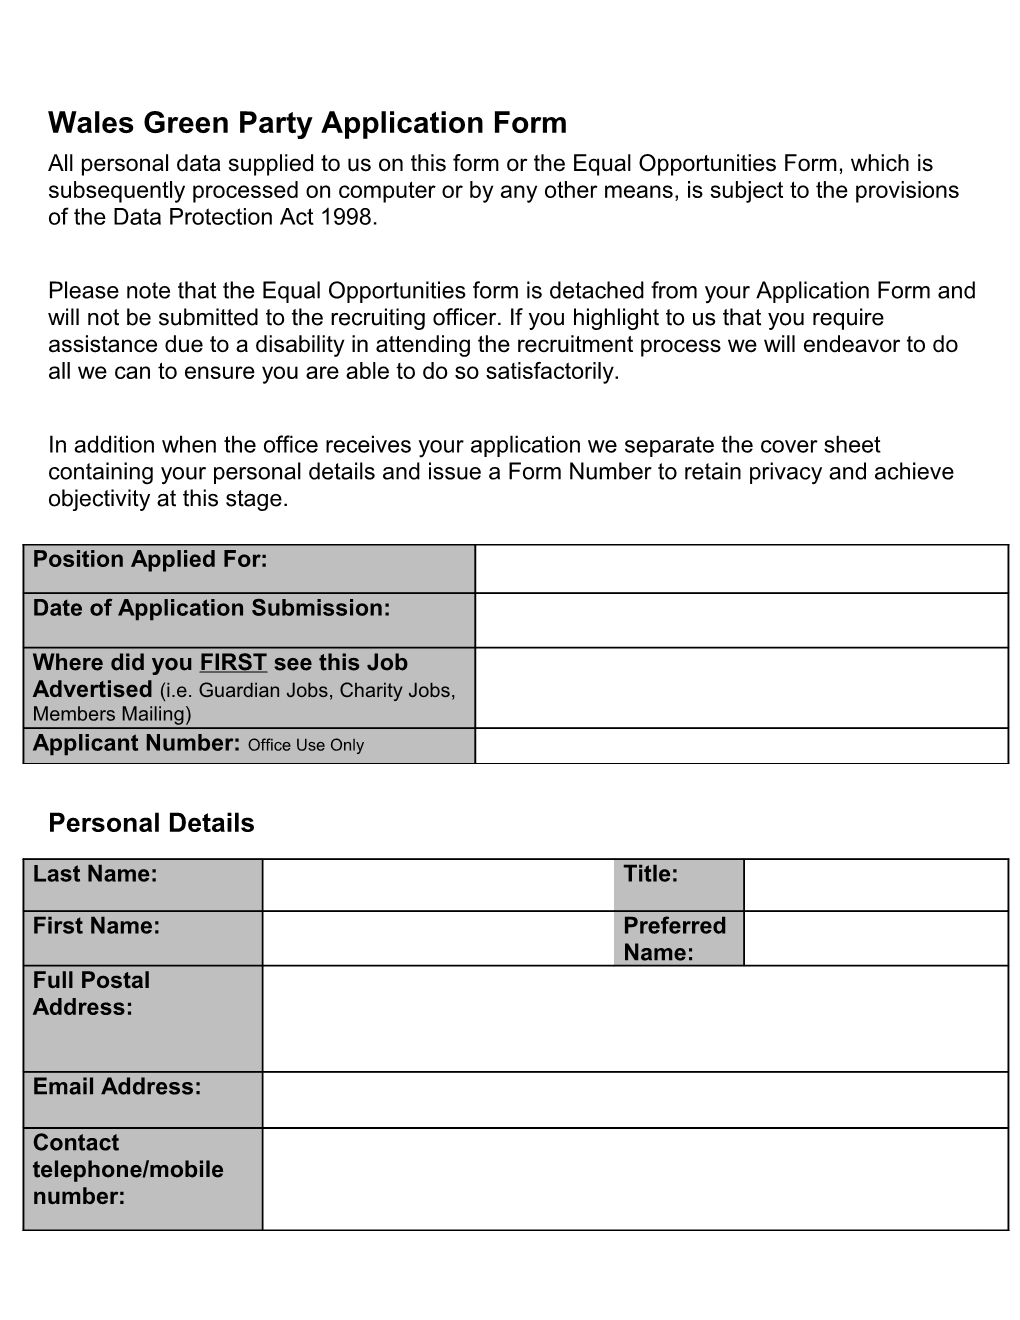 Wales Green Party Application Form